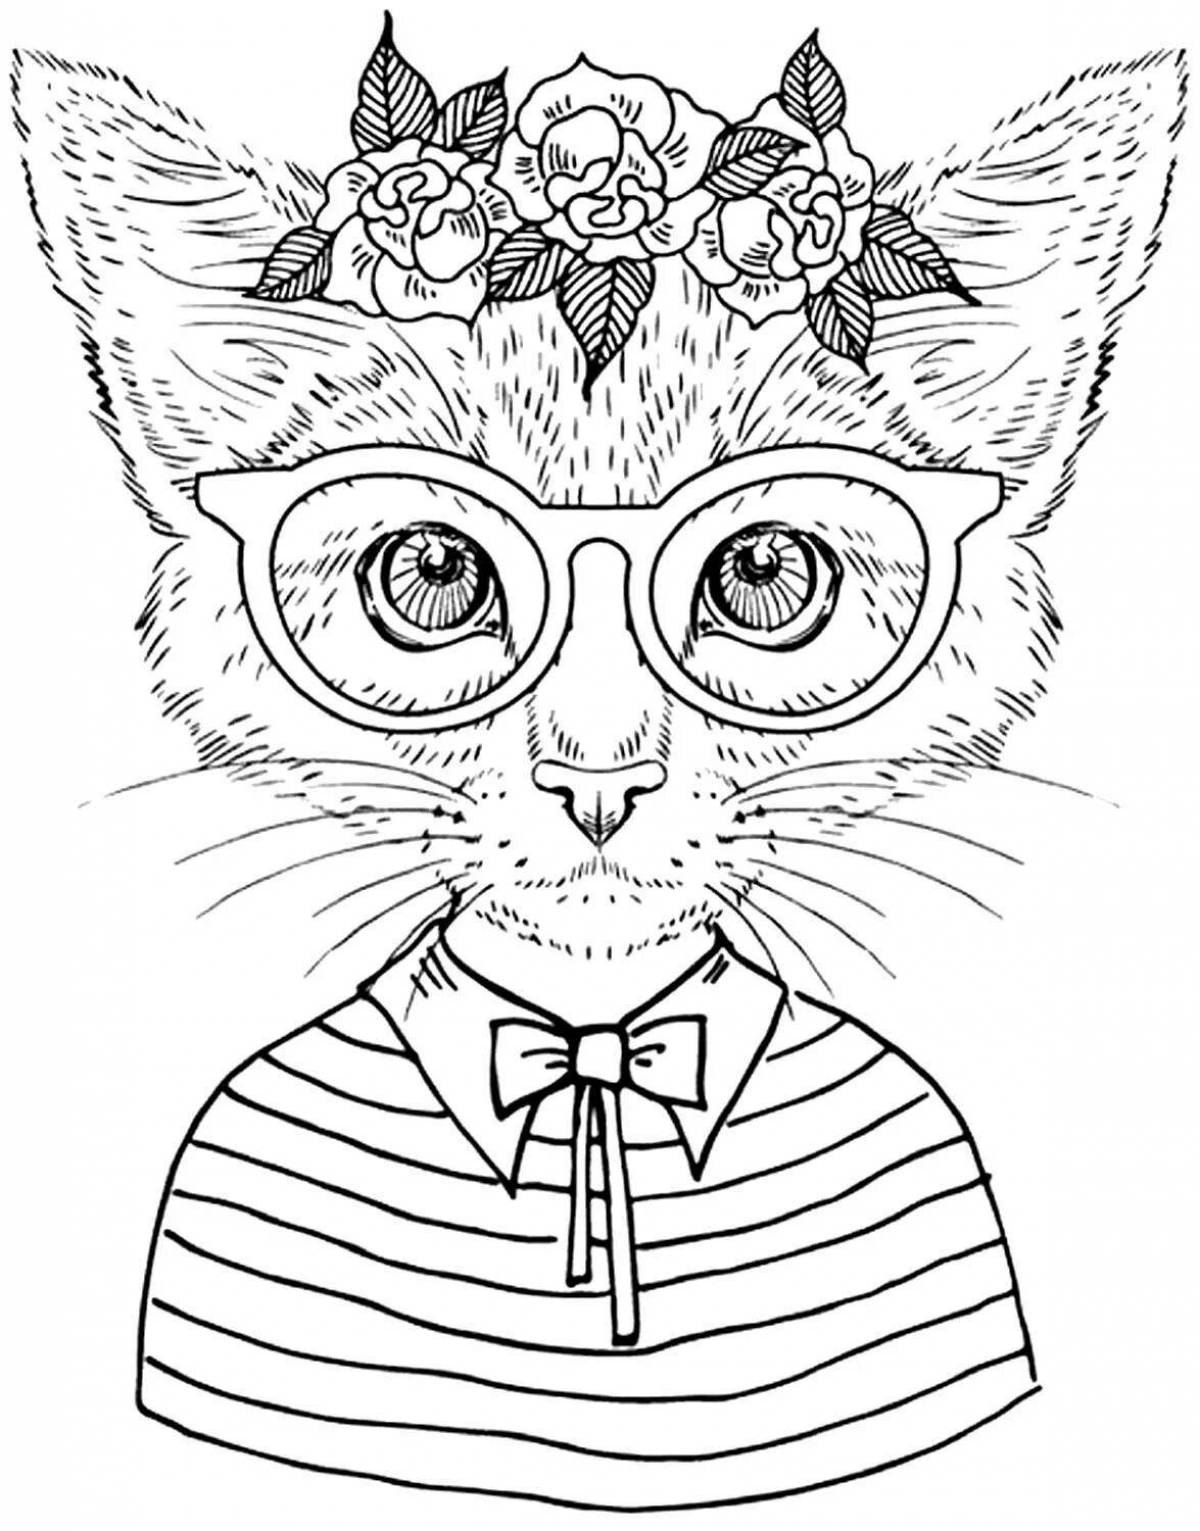 Attractive adult coloring book